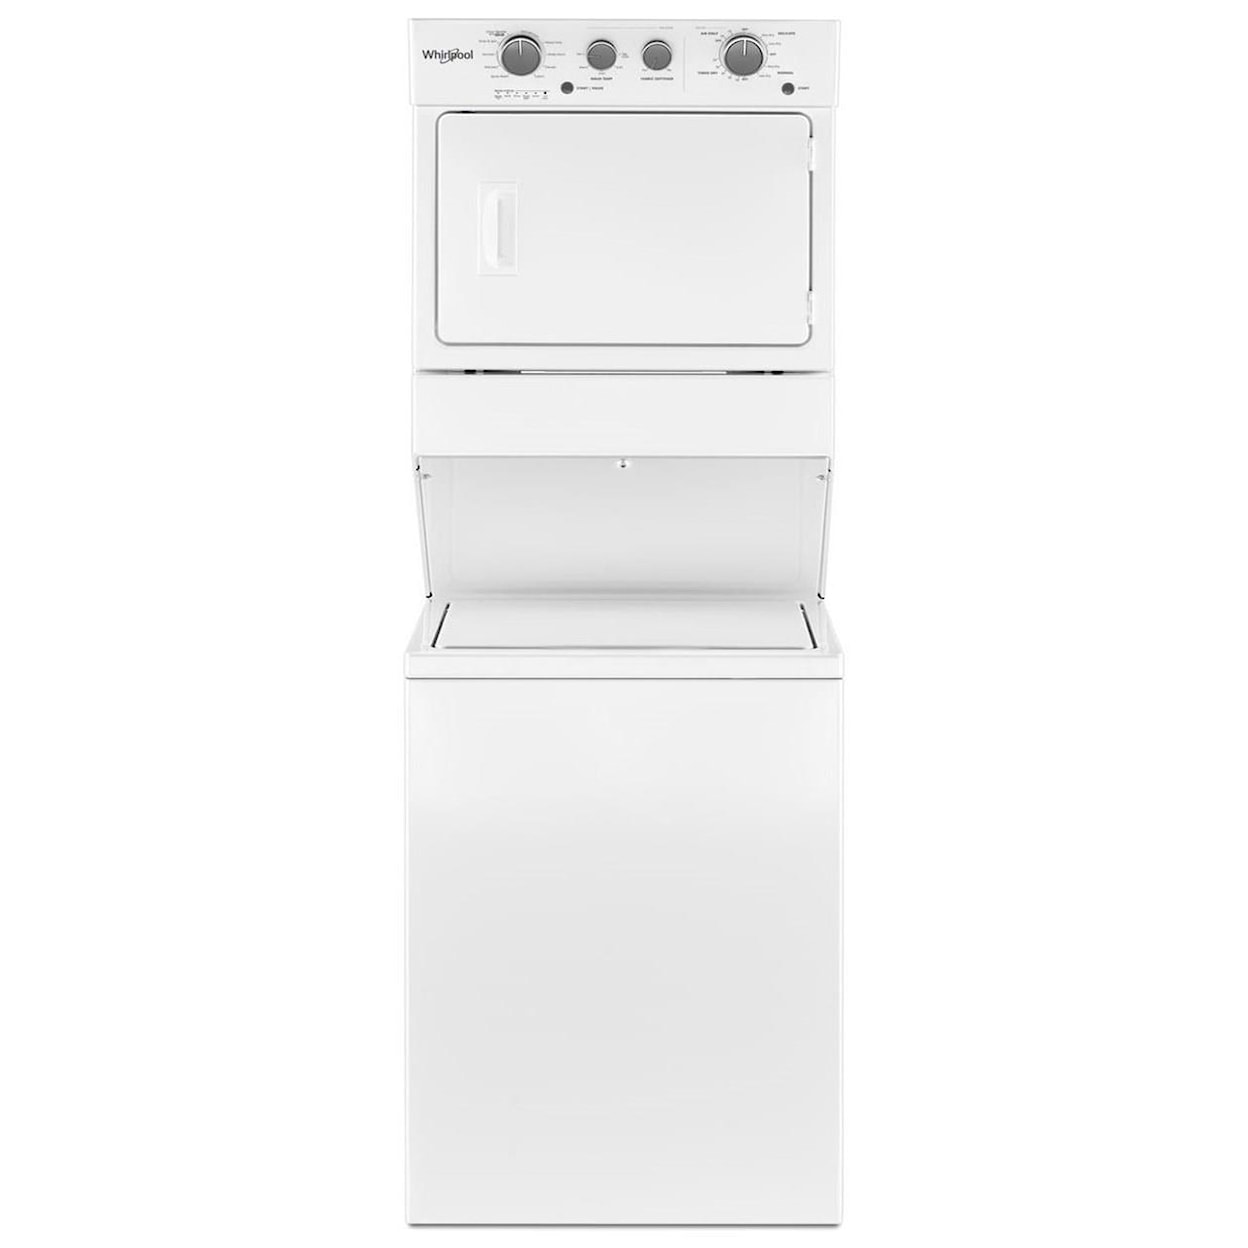 Whirlpool Washer and Dryer Sets 3.5 Cu. Ft. Electric Stacked Laundry Unit